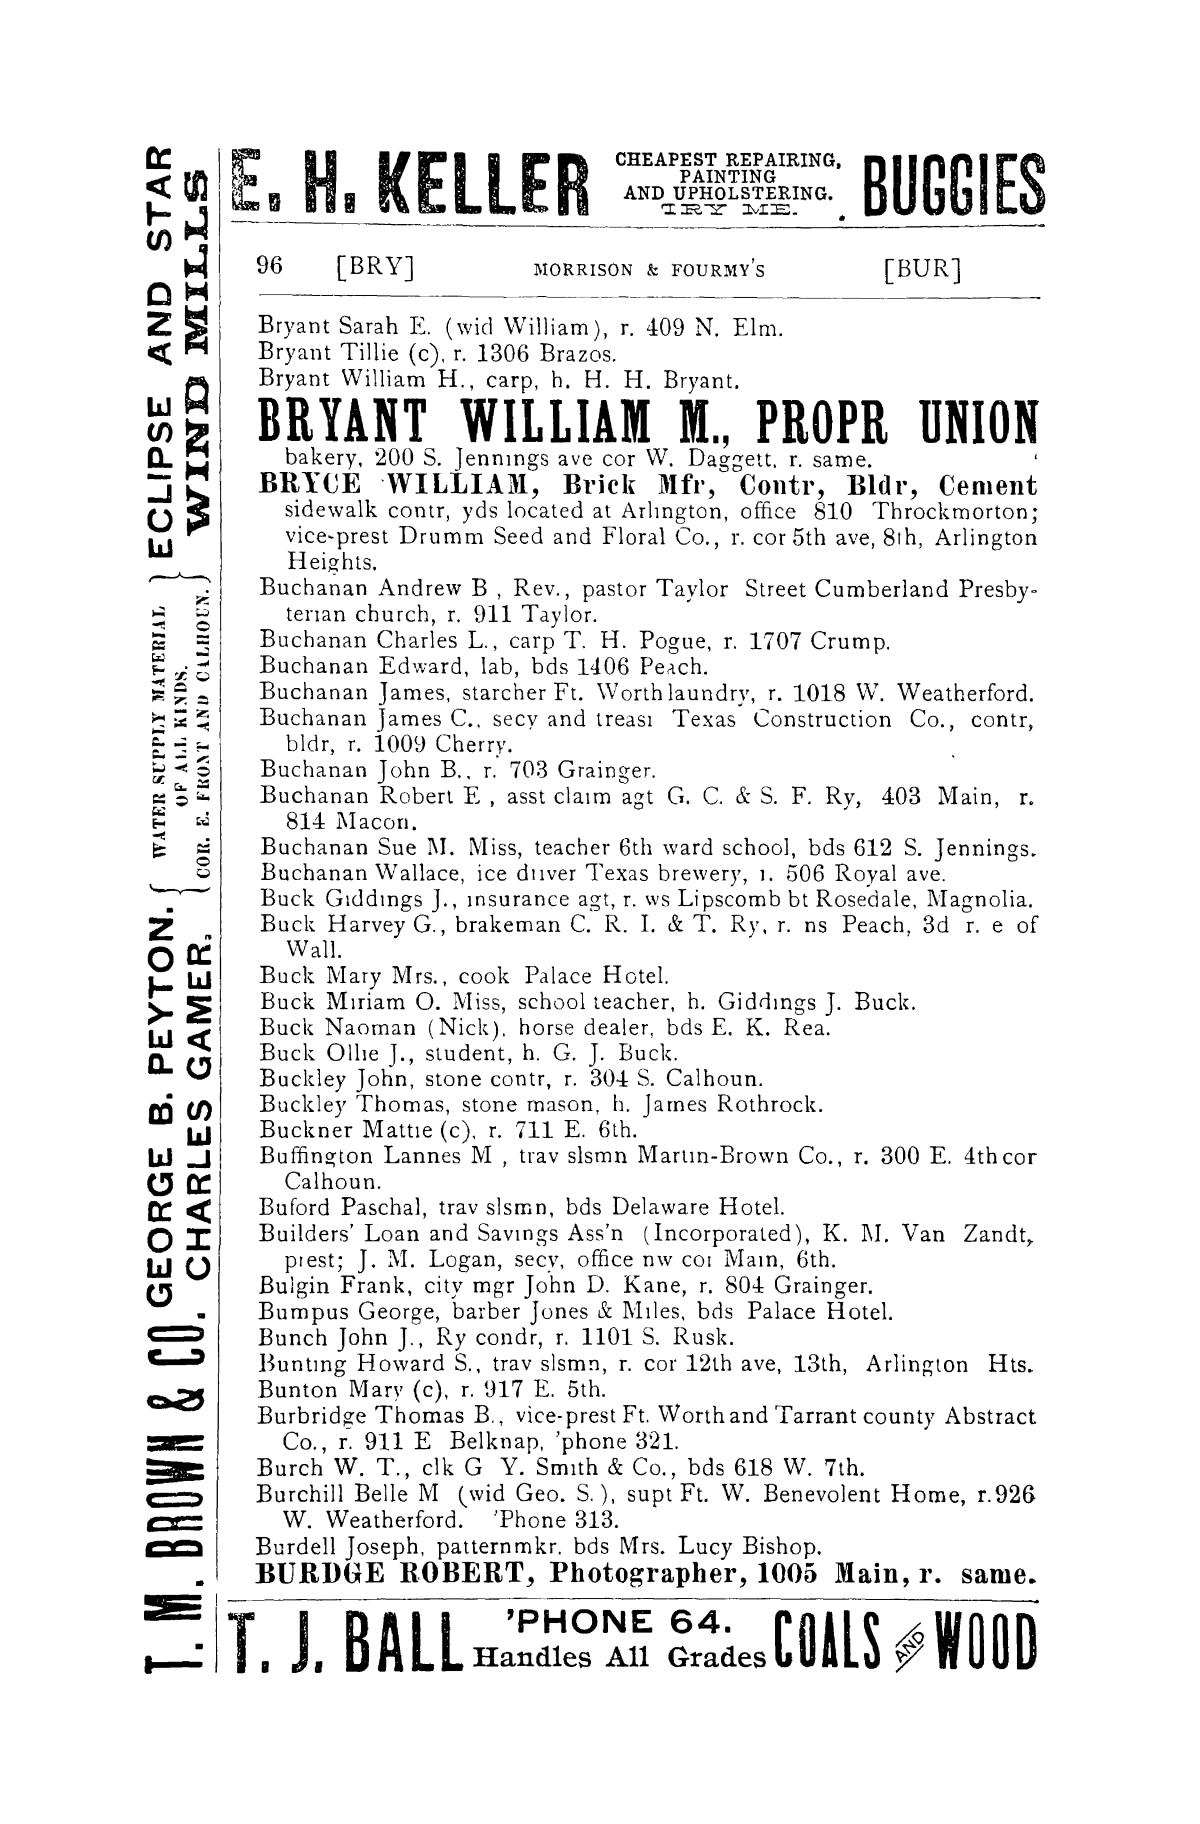 Morrison & Fourmy's general directory of the City of Fort Worth, 1896 - 1897
                                                
                                                    96
                                                